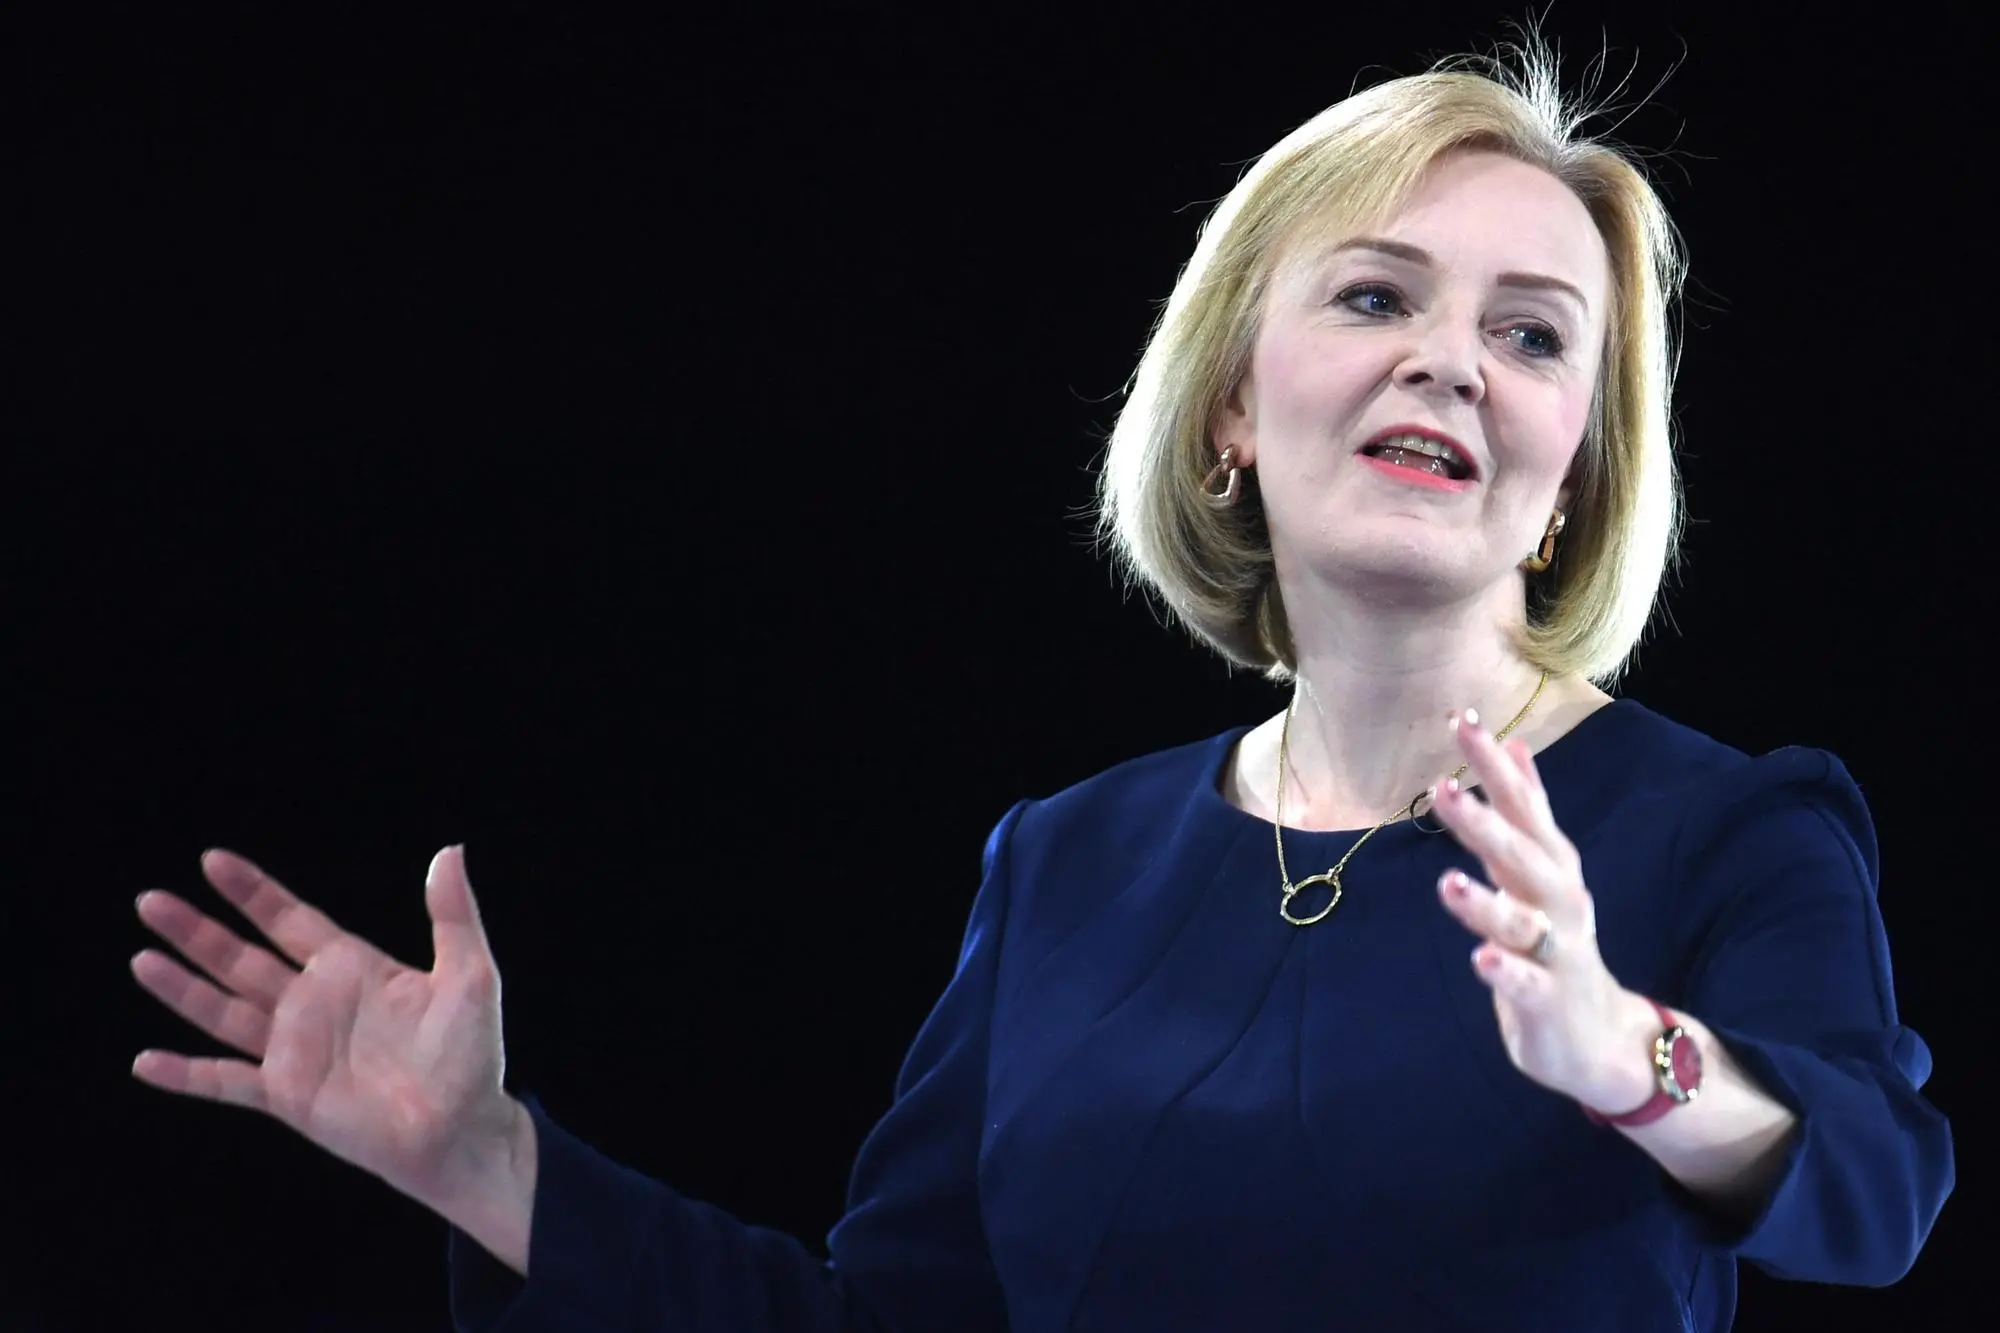 British Foreign Secretary and Tory leadership candidate Liz Truss at the Conservative Party leadership election hustings at Wembley Arena, London, Britain 31 August 2022. ANSAA/NEIL HALL